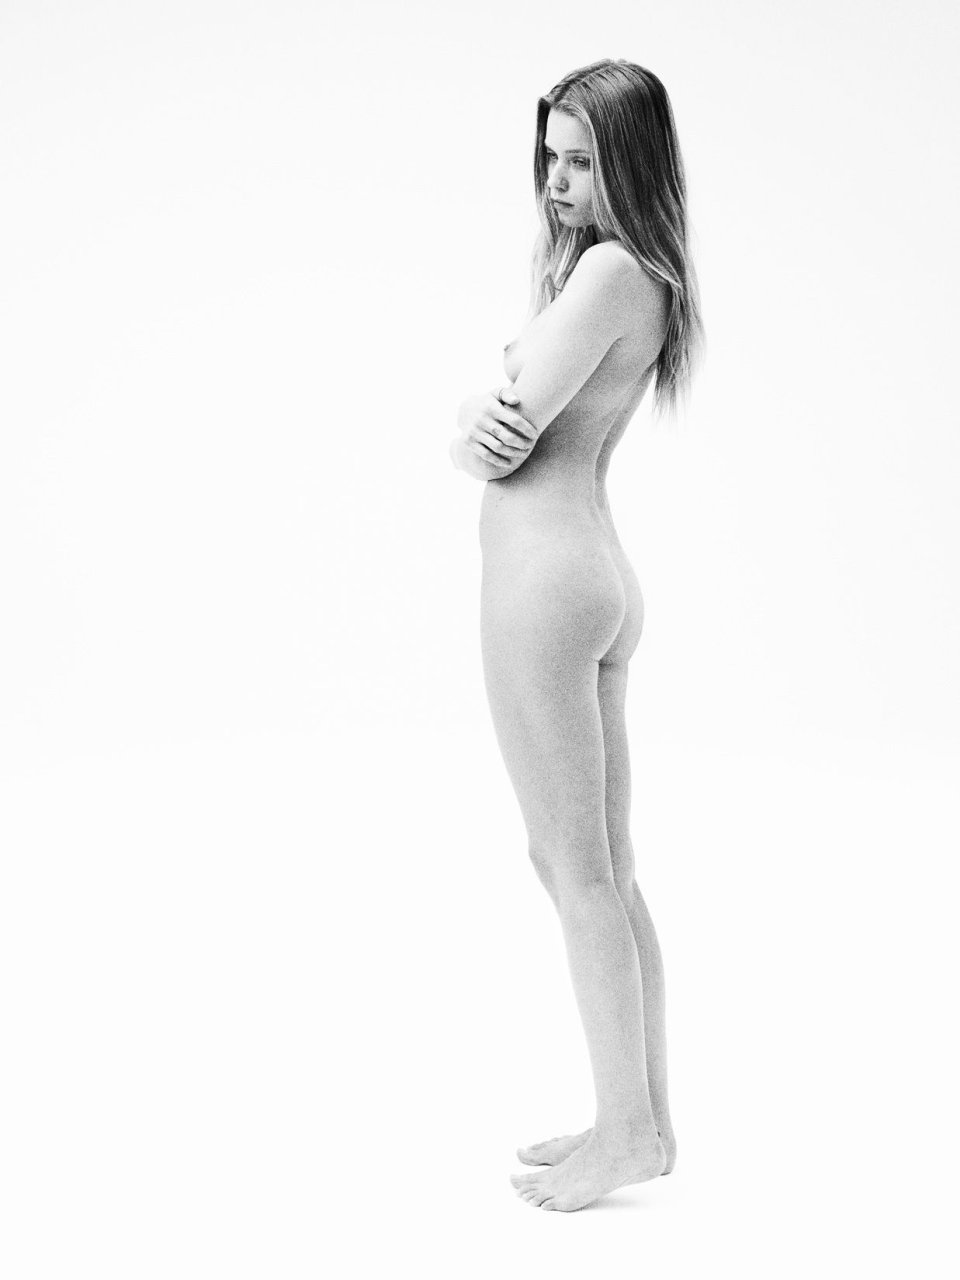 Abbey Lee Kershaw Naked (3 Photos)